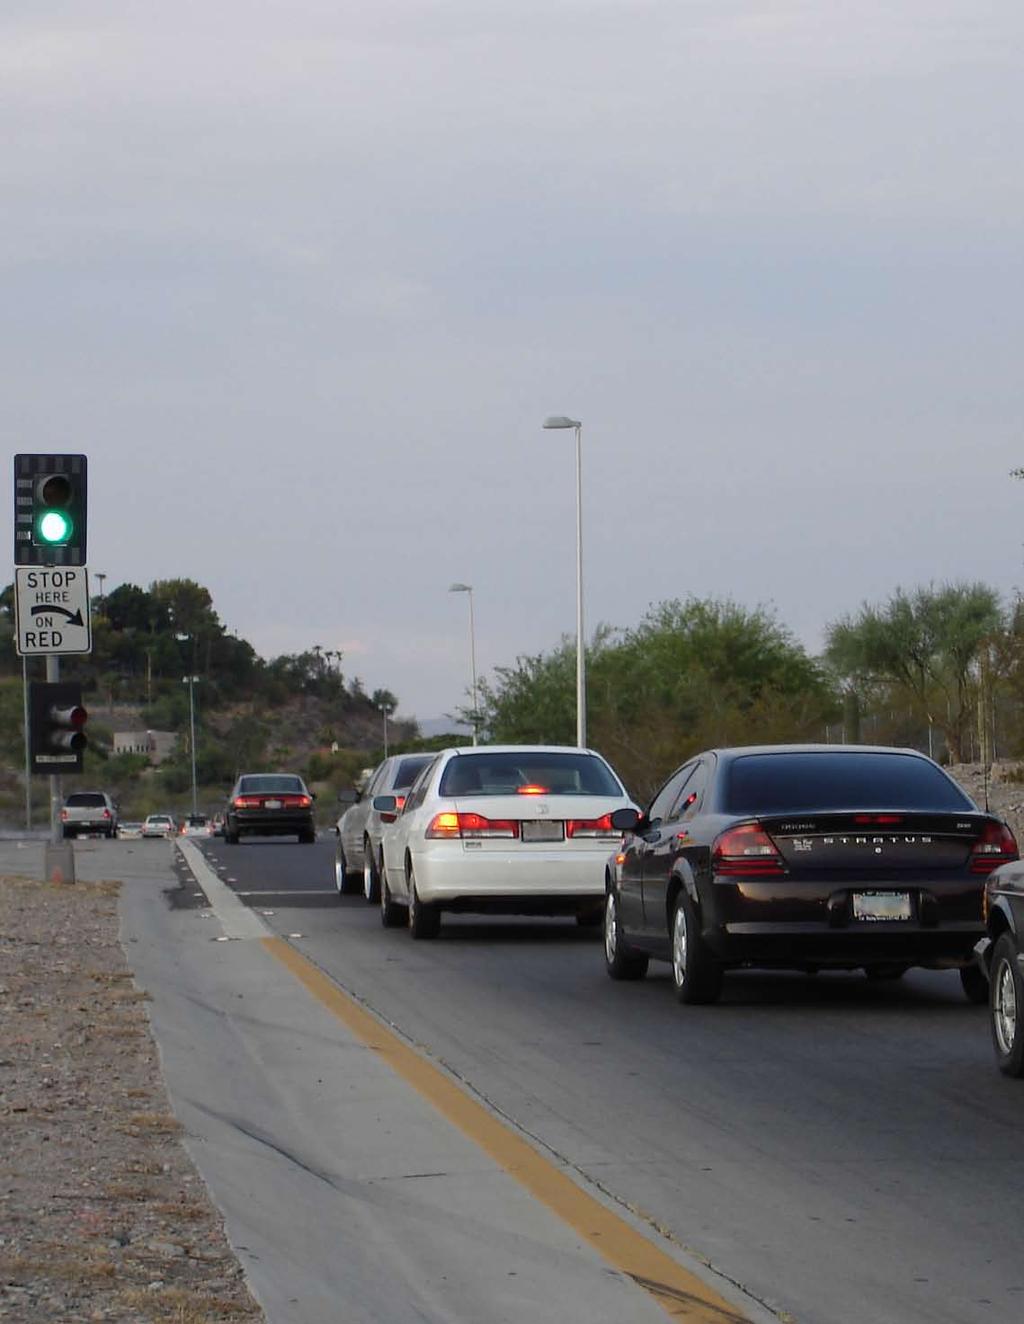 Conclusion The goal of the I-435 ramp metering pilot program was to help decrease congestion by maximizing the flow of traffic and increasing merge safety on the freeway.